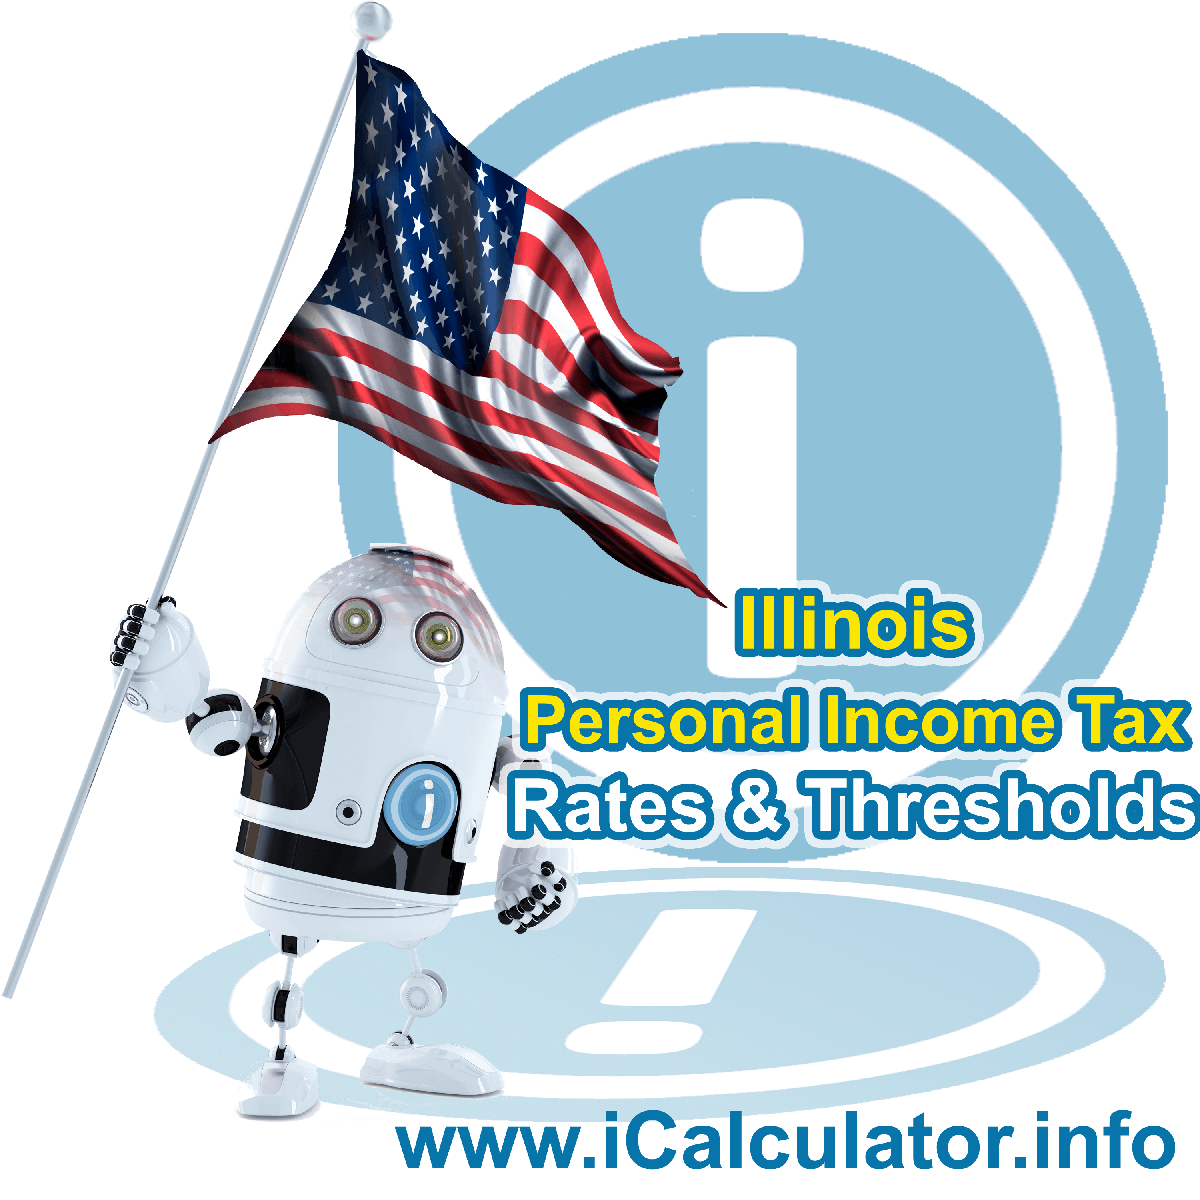 Illinois State Tax Tables 2019. This image displays details of the Illinois State Tax Tables for the 2019 tax return year which is provided in support of the 2019 US Tax Calculator